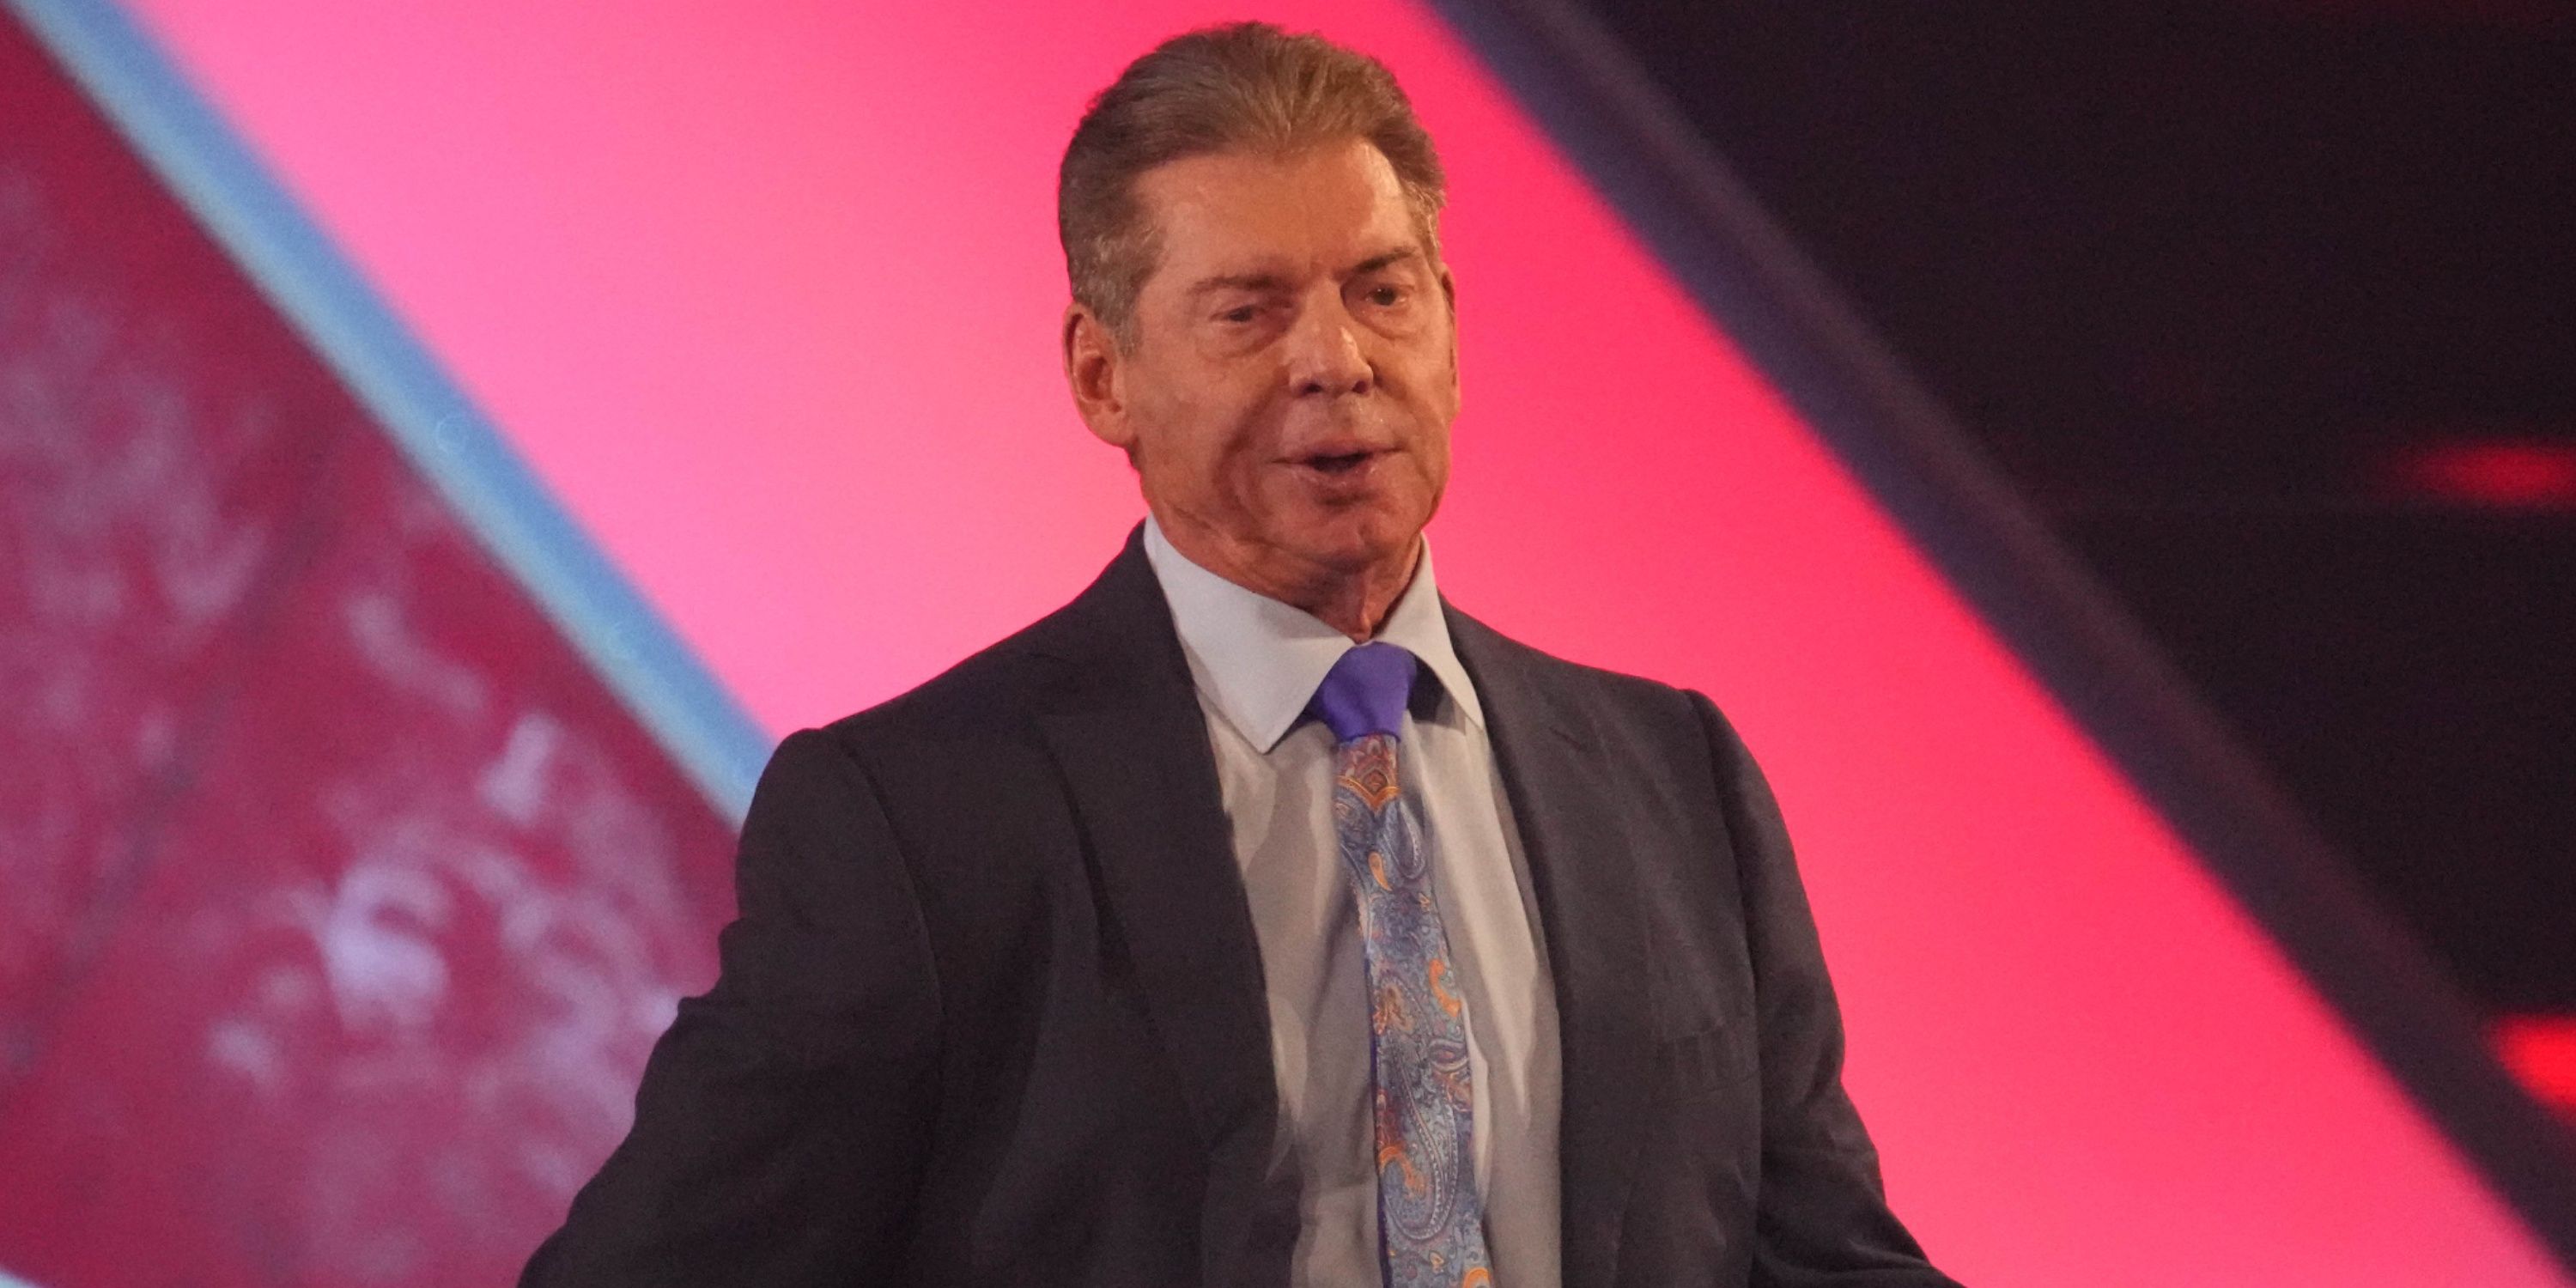 Vince McMahon during an episode of WWE